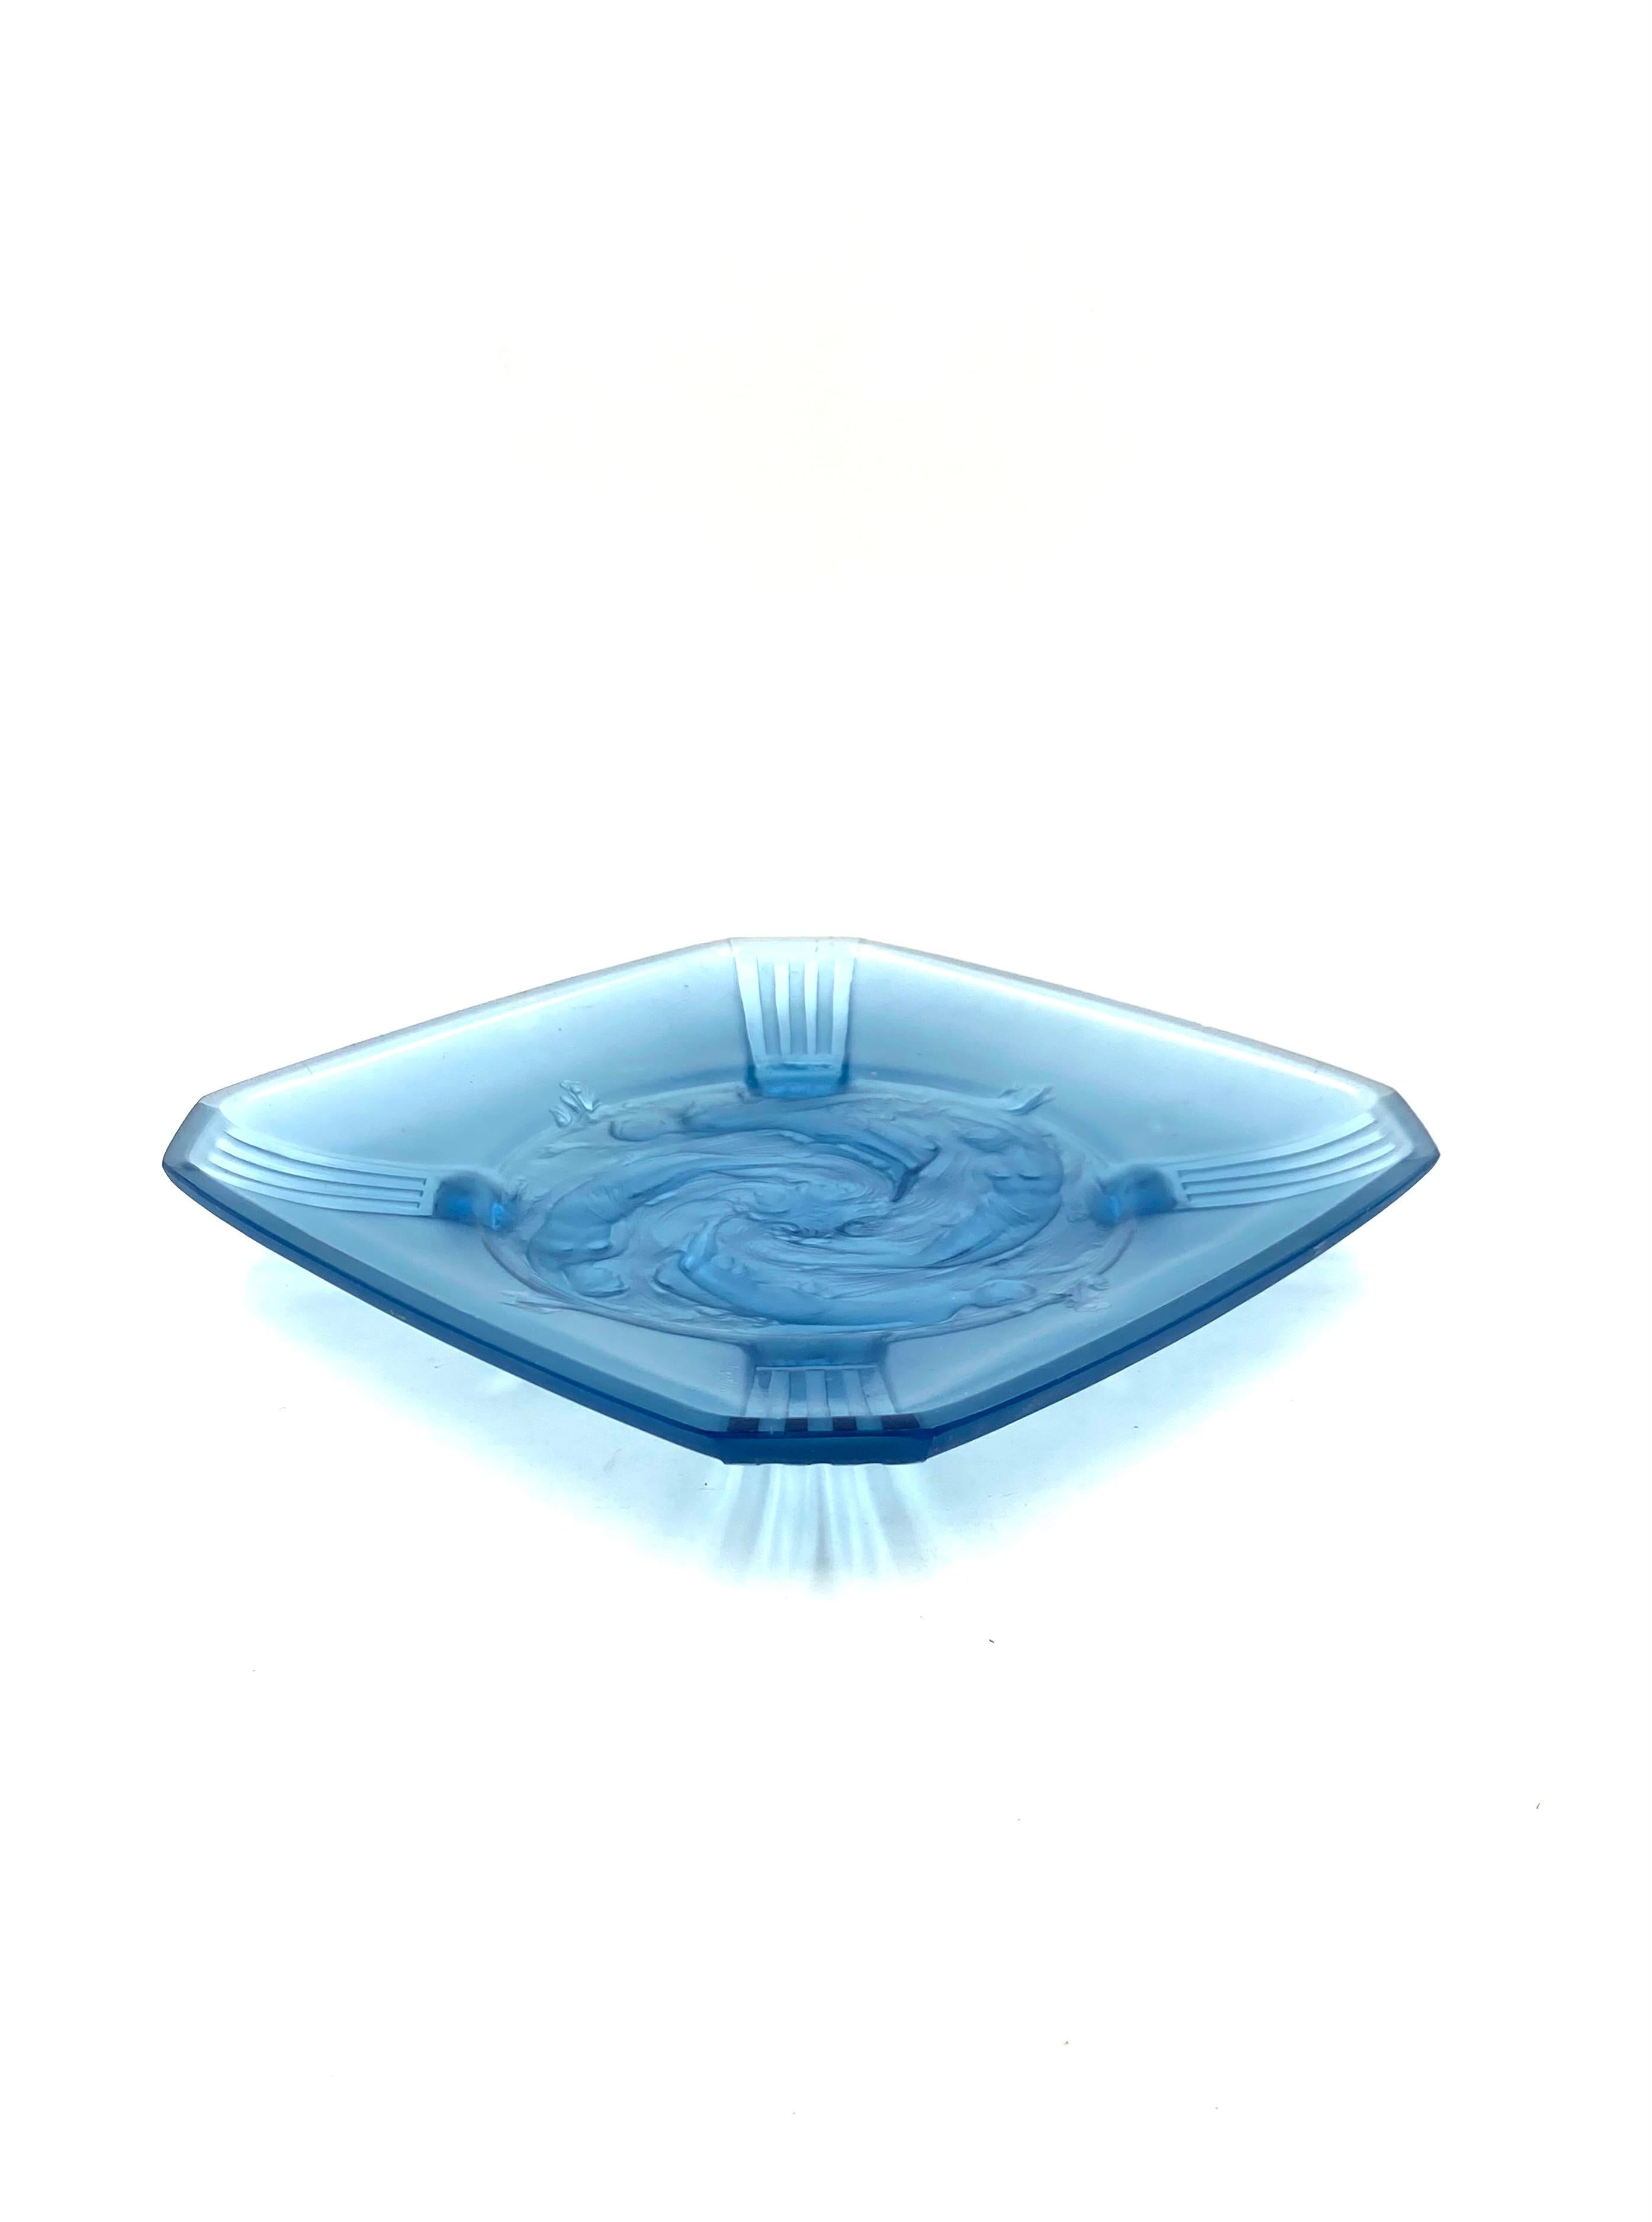 Verreries Des Hanots, Important 'Naiads' Molded Glass Tray, France, 1930s For Sale 7